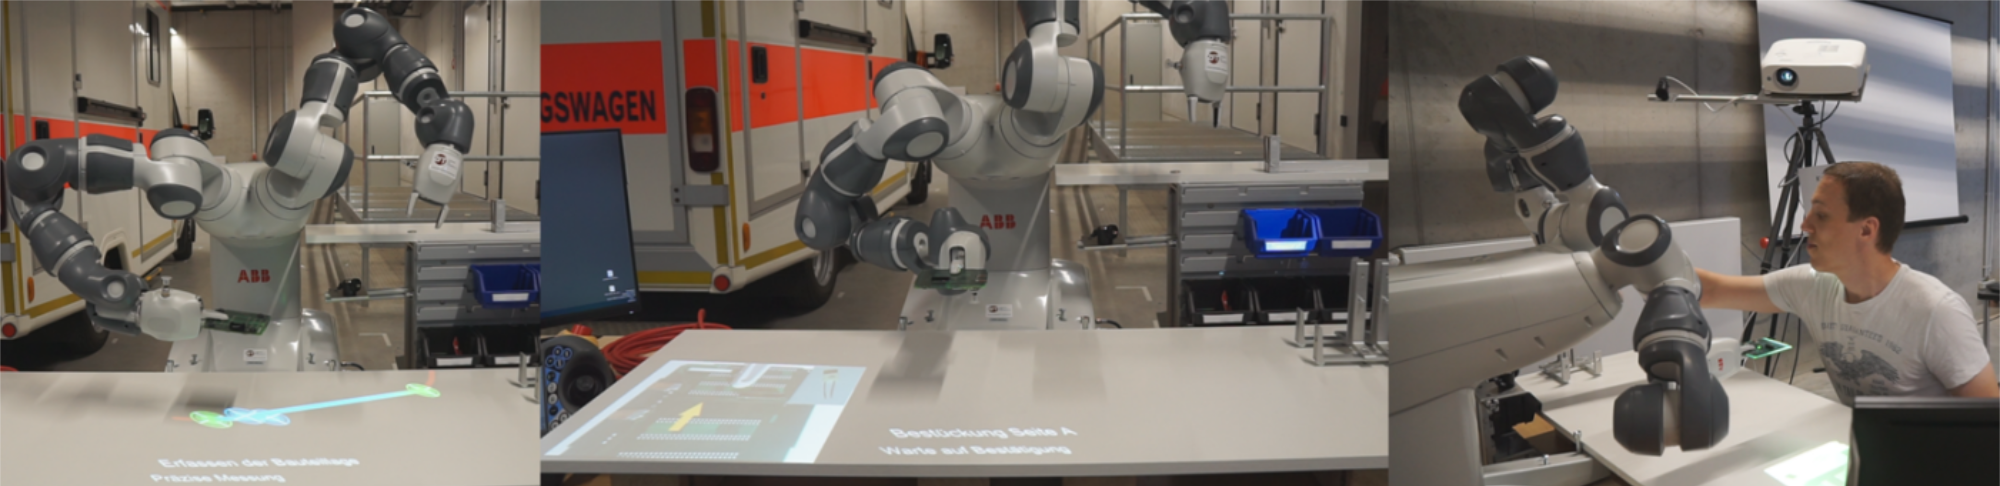 Spatial Augmented Reality and collaborative robotics